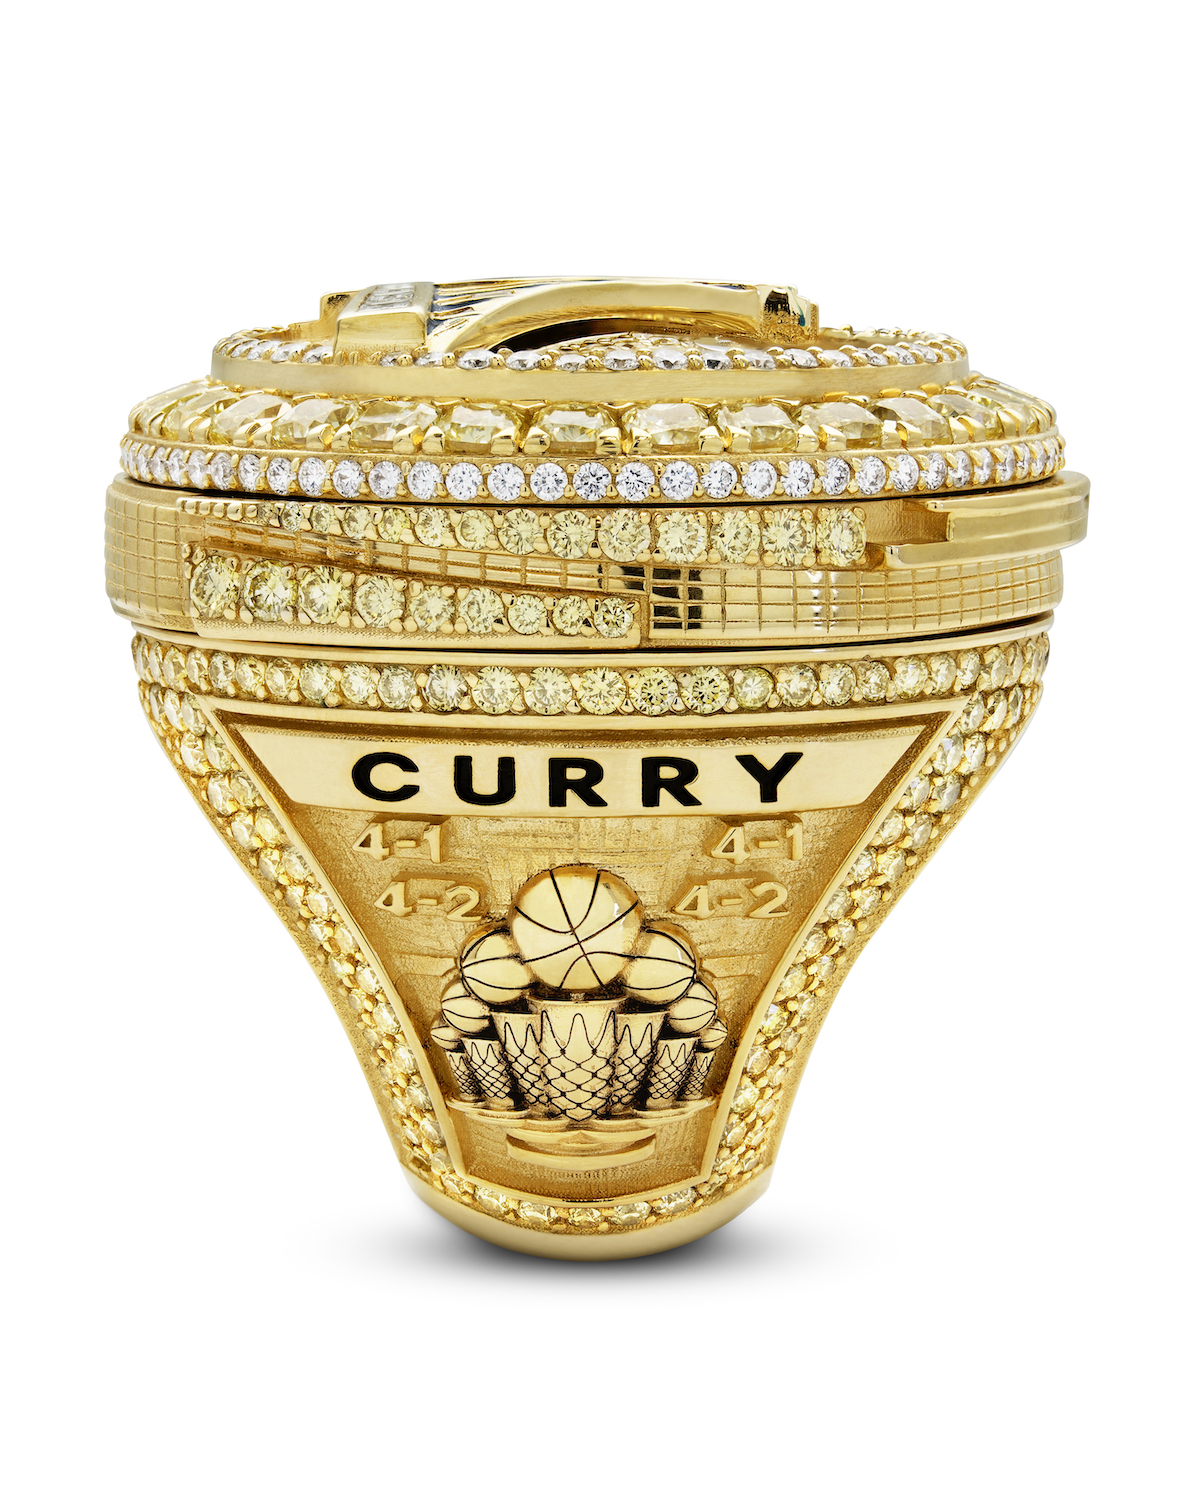 Golden State Warriors championship rings are beautiful